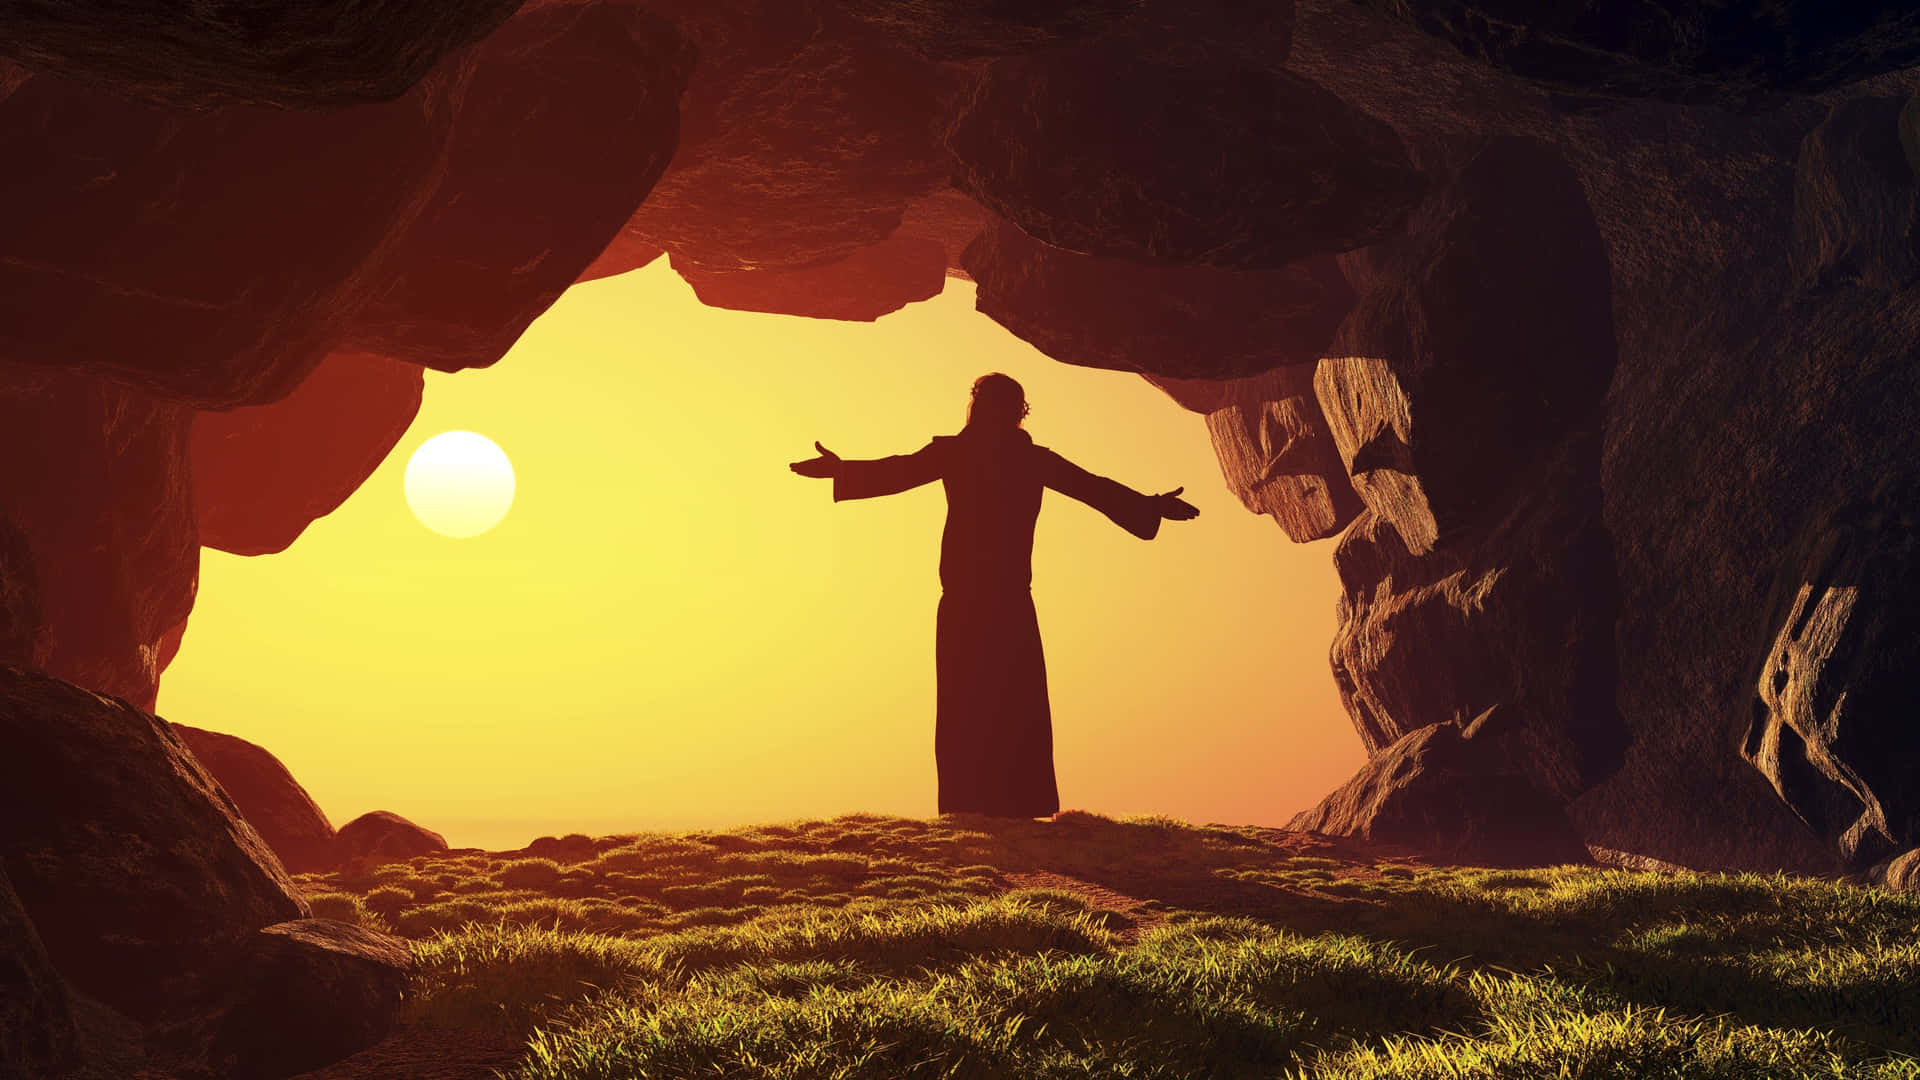 Celebrating the Resurrection of Jesus on a Religious Easter Background